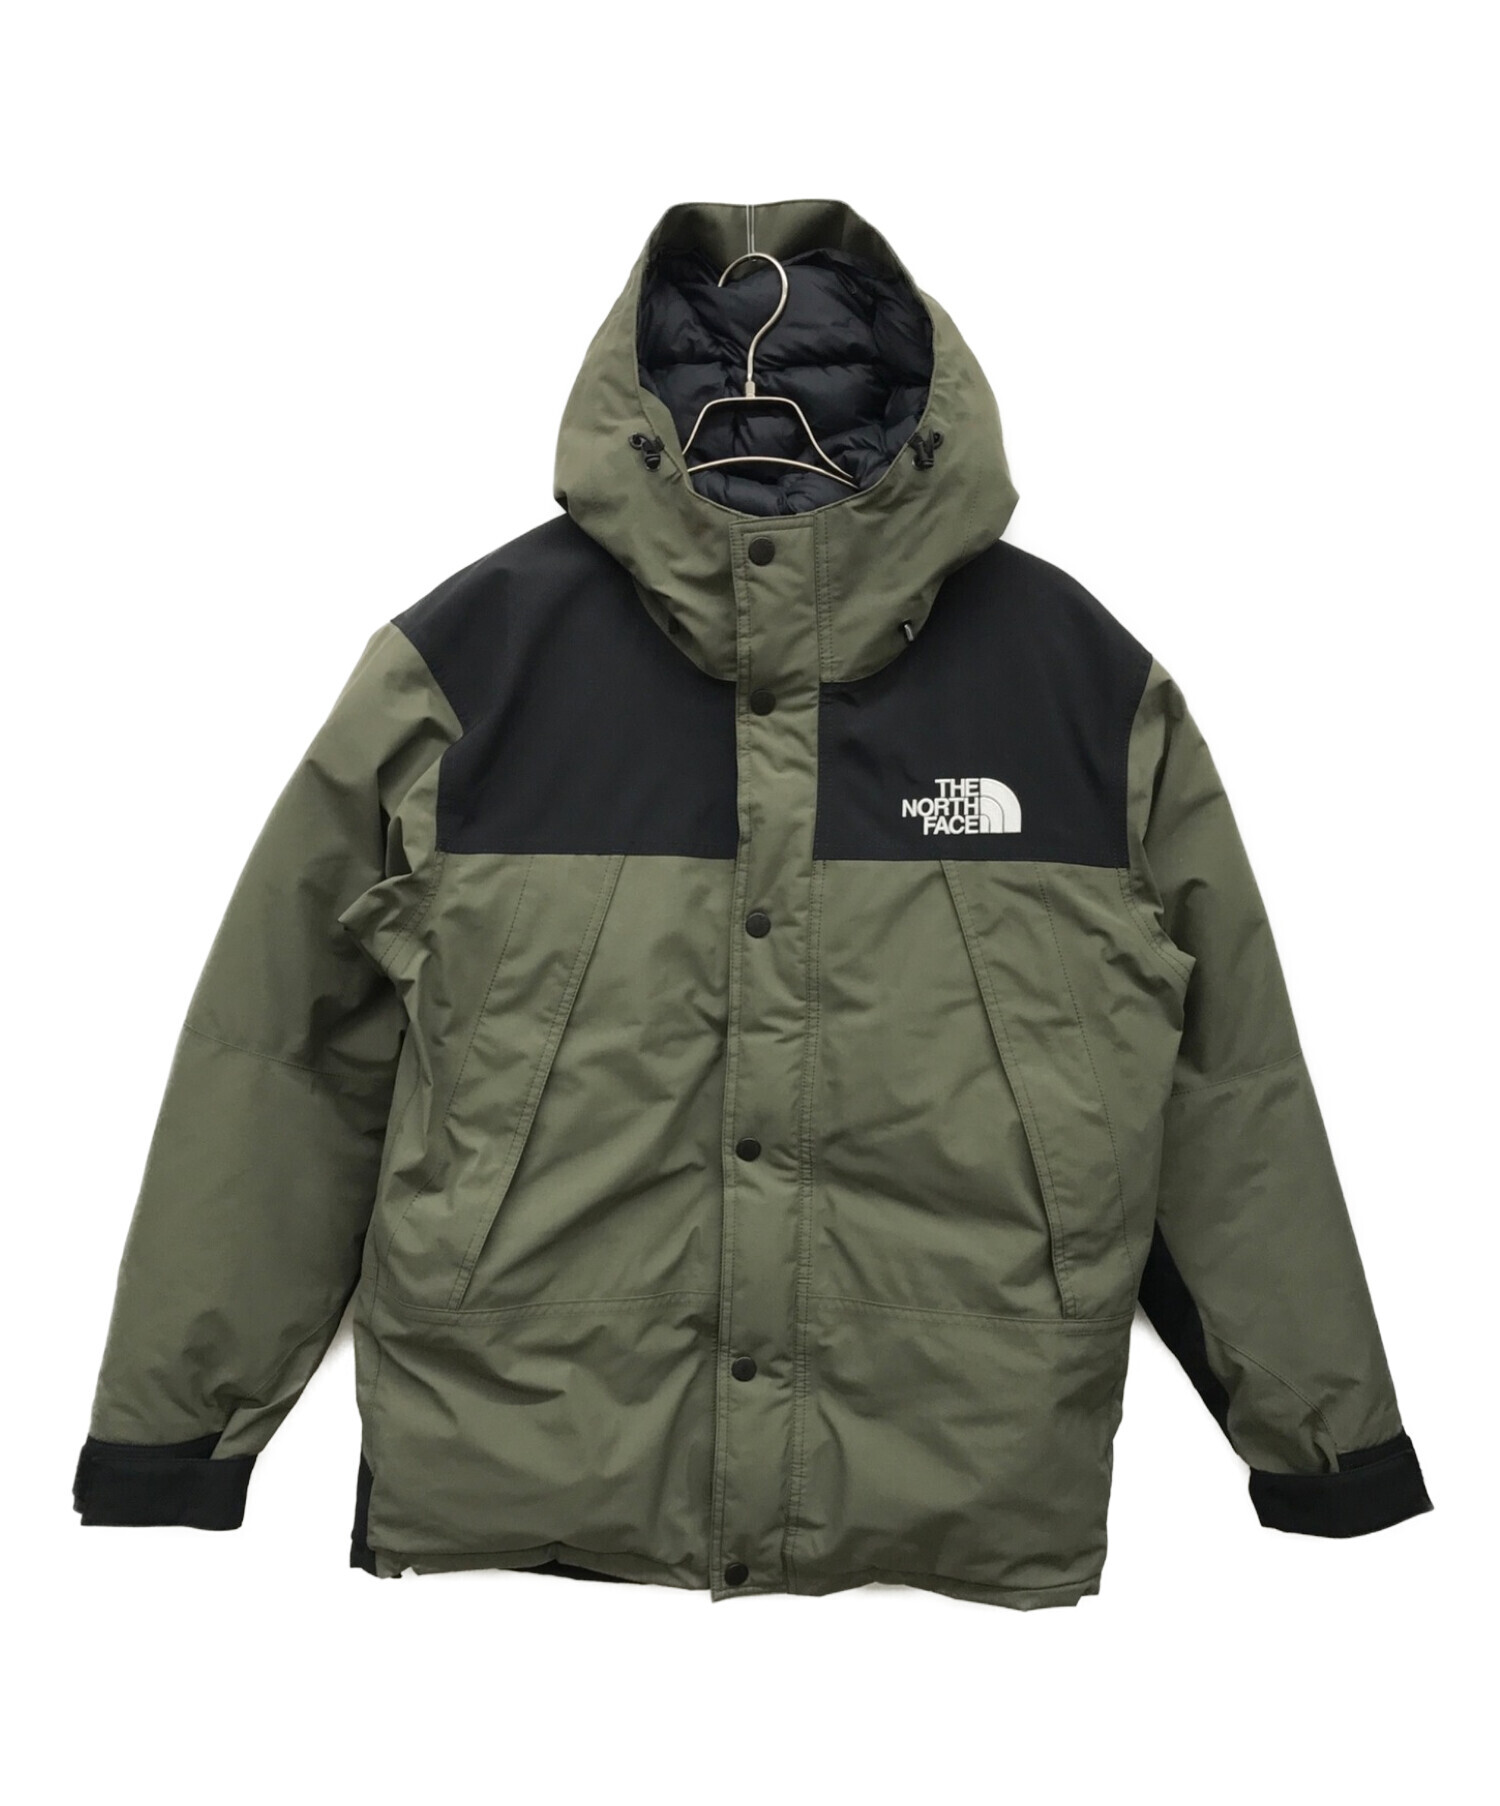 THE NORTH FACE Mountain Down Jacket - ジャケット/アウター